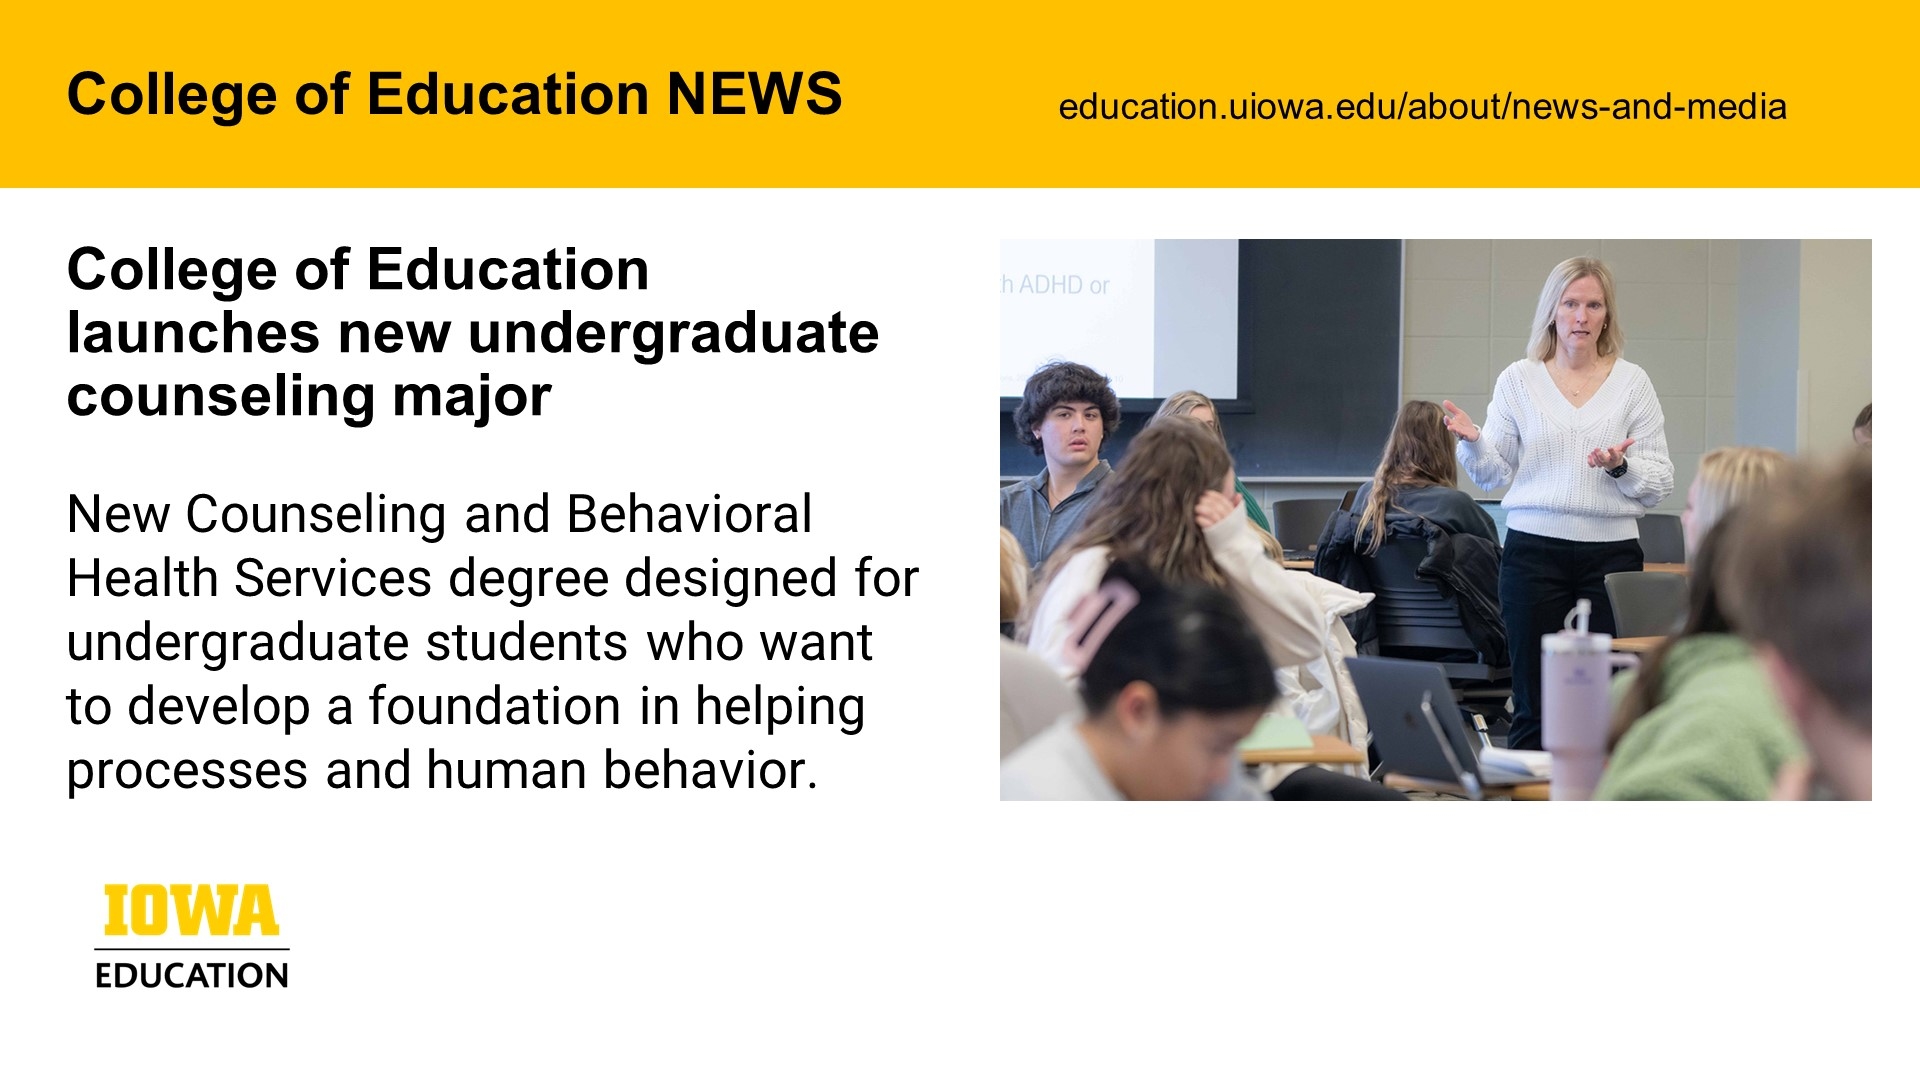 College of Education launches new undergraduate counseling major. education.uiowa.edu/about/news-and-media